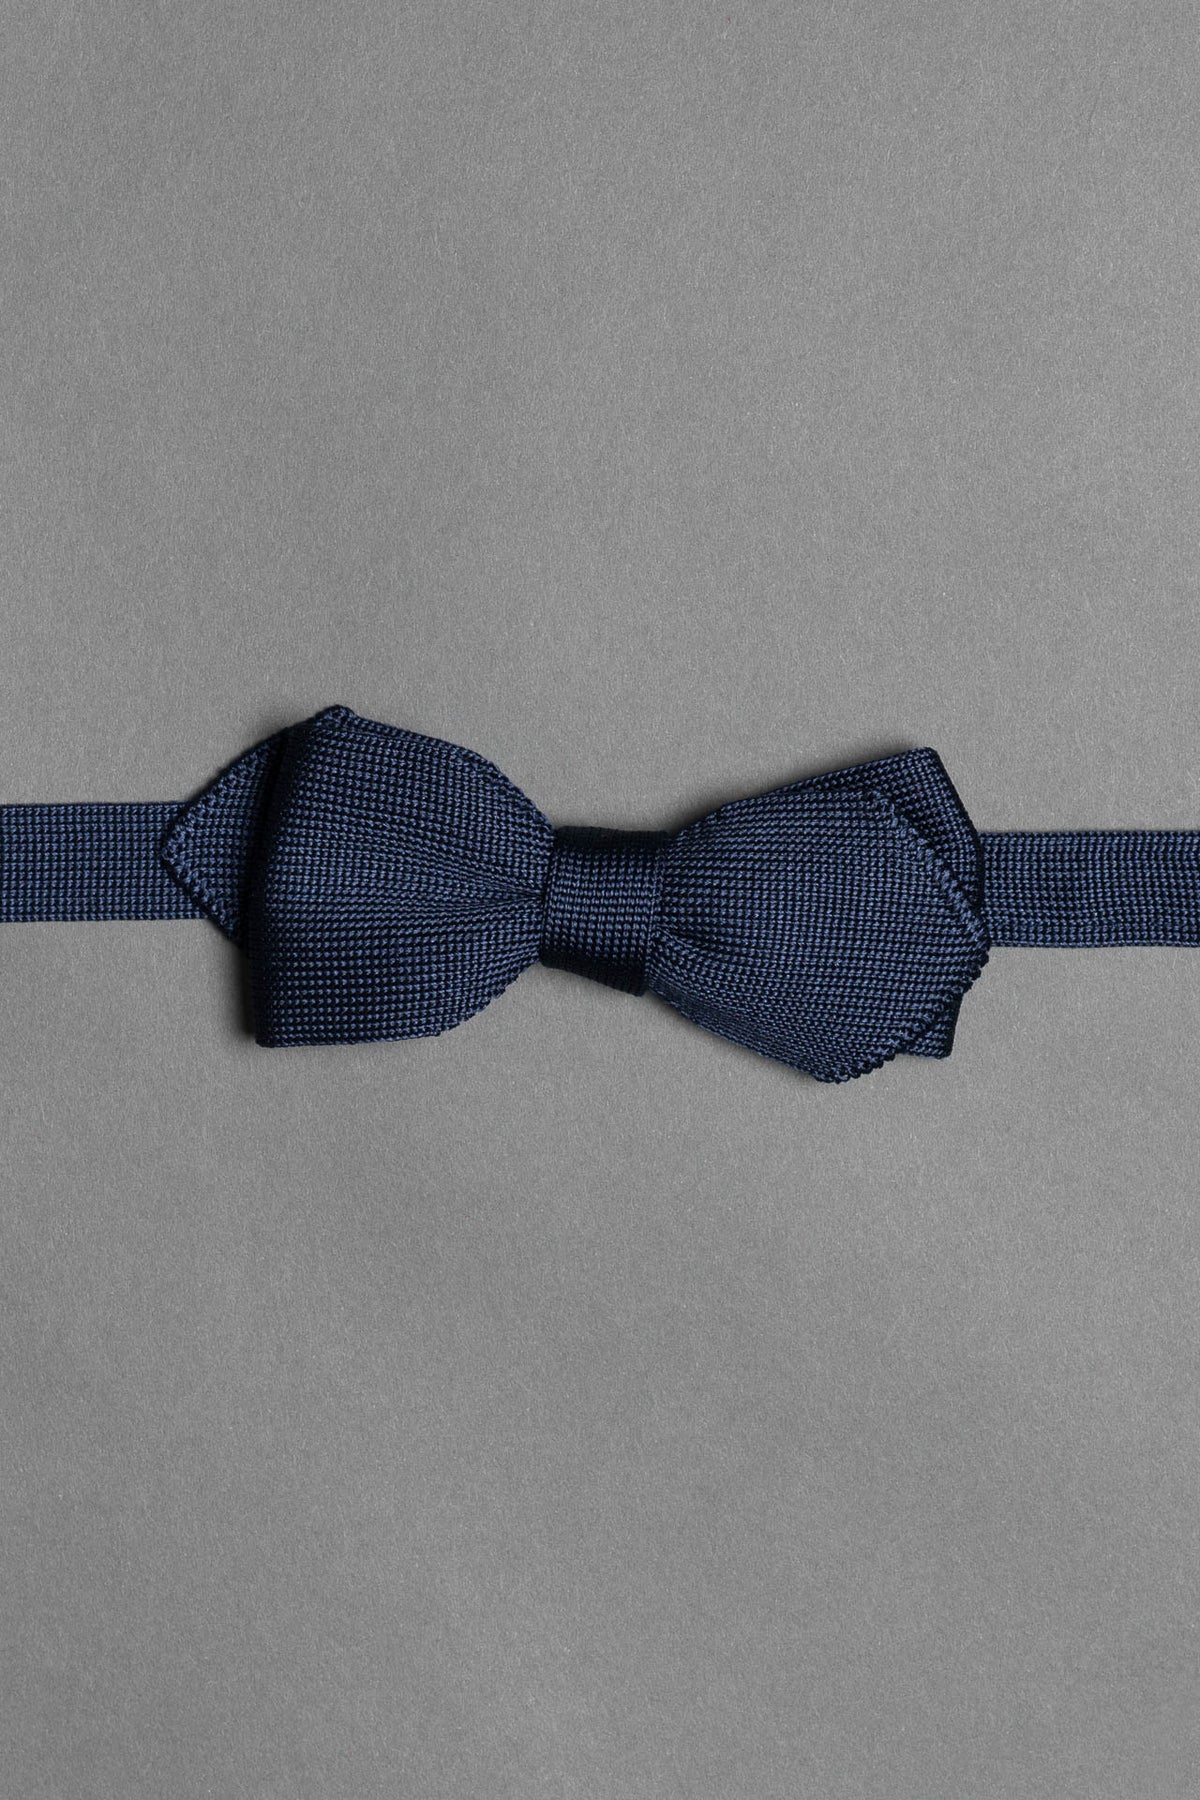 navy-blue-bow-tie-silk-knitted-self-tying-onceaday-made-in-italy